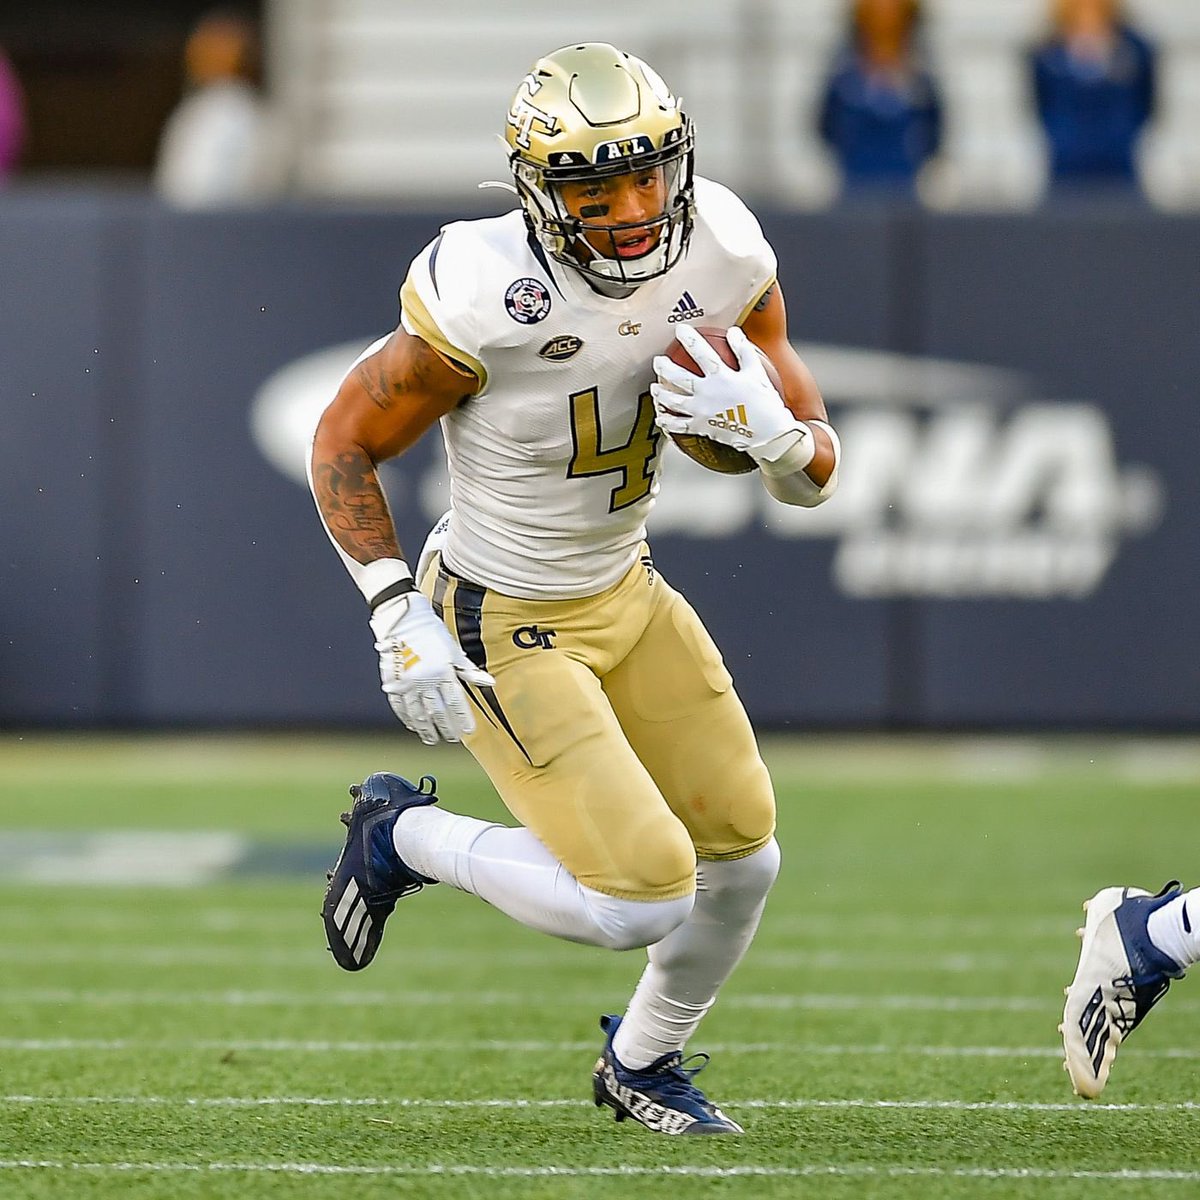 Georgia Tech standout running back Dontae Smith has accepted an offer to attend New York #Giants rookie minicamp, sources tell @_MLFootball.